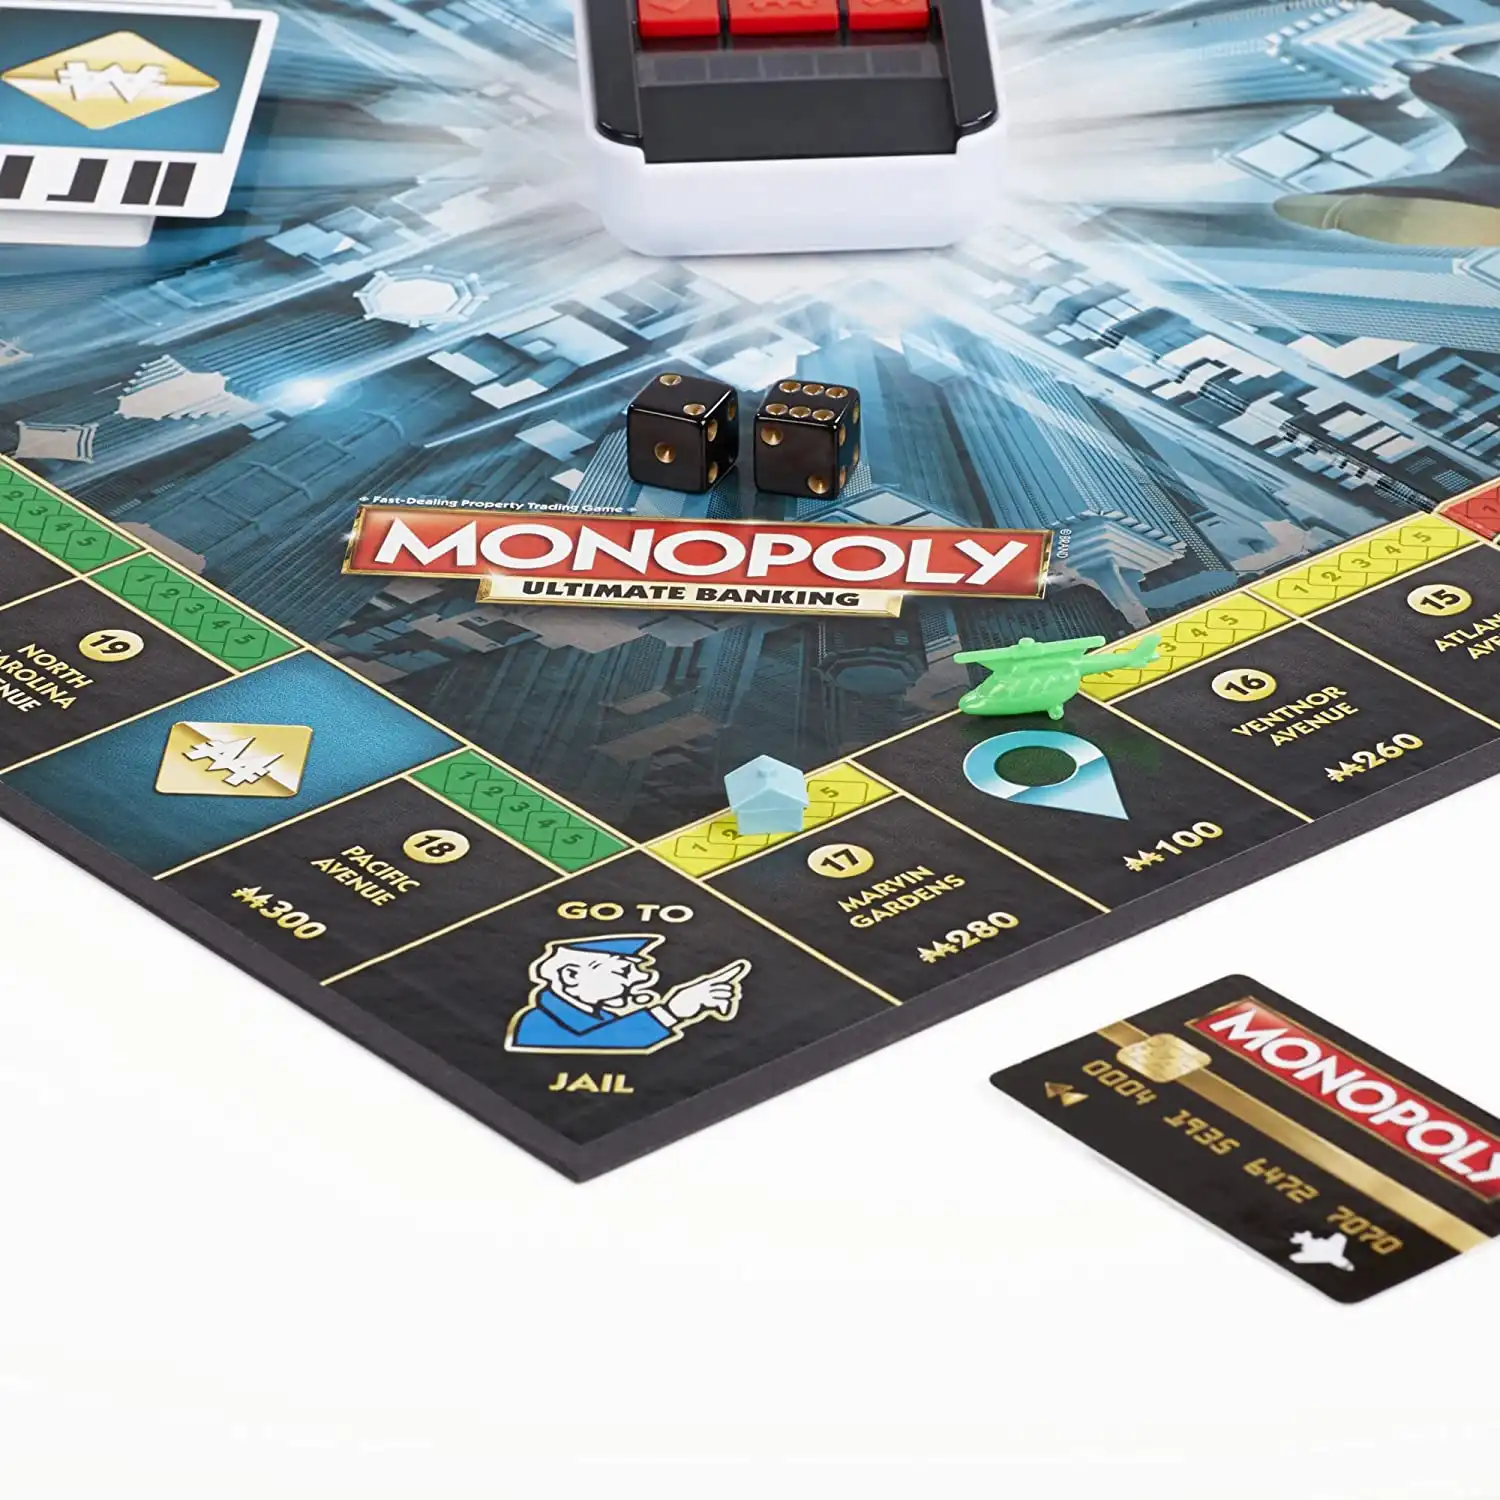 Monopoly: Ultimate Banking (2016) meeples 2